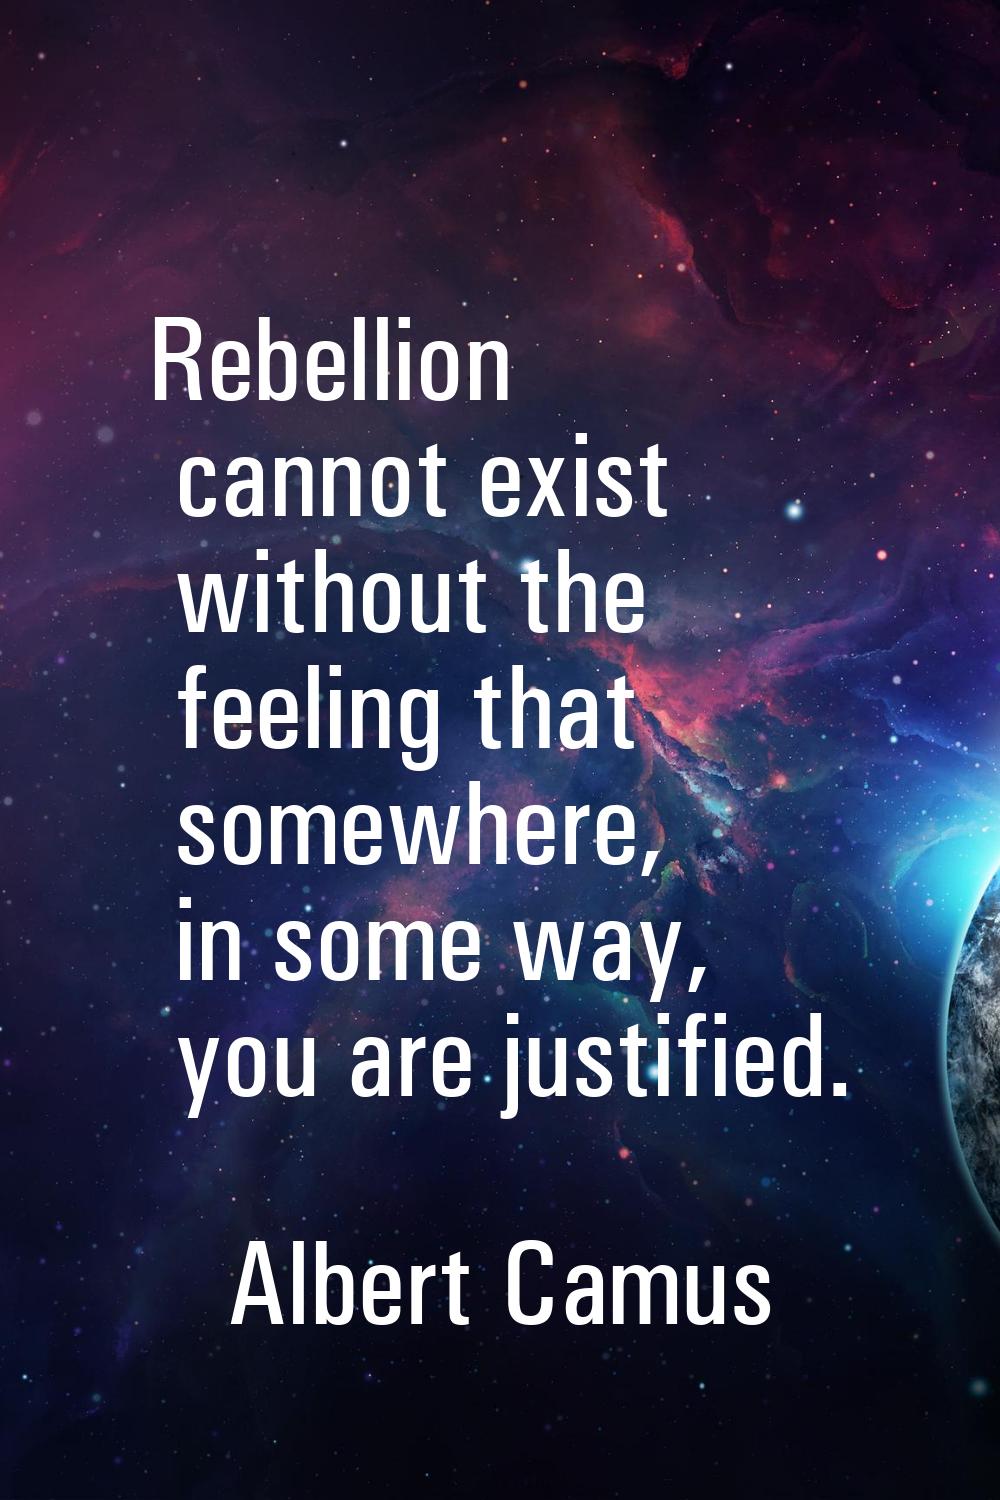 Rebellion cannot exist without the feeling that somewhere, in some way, you are justified.